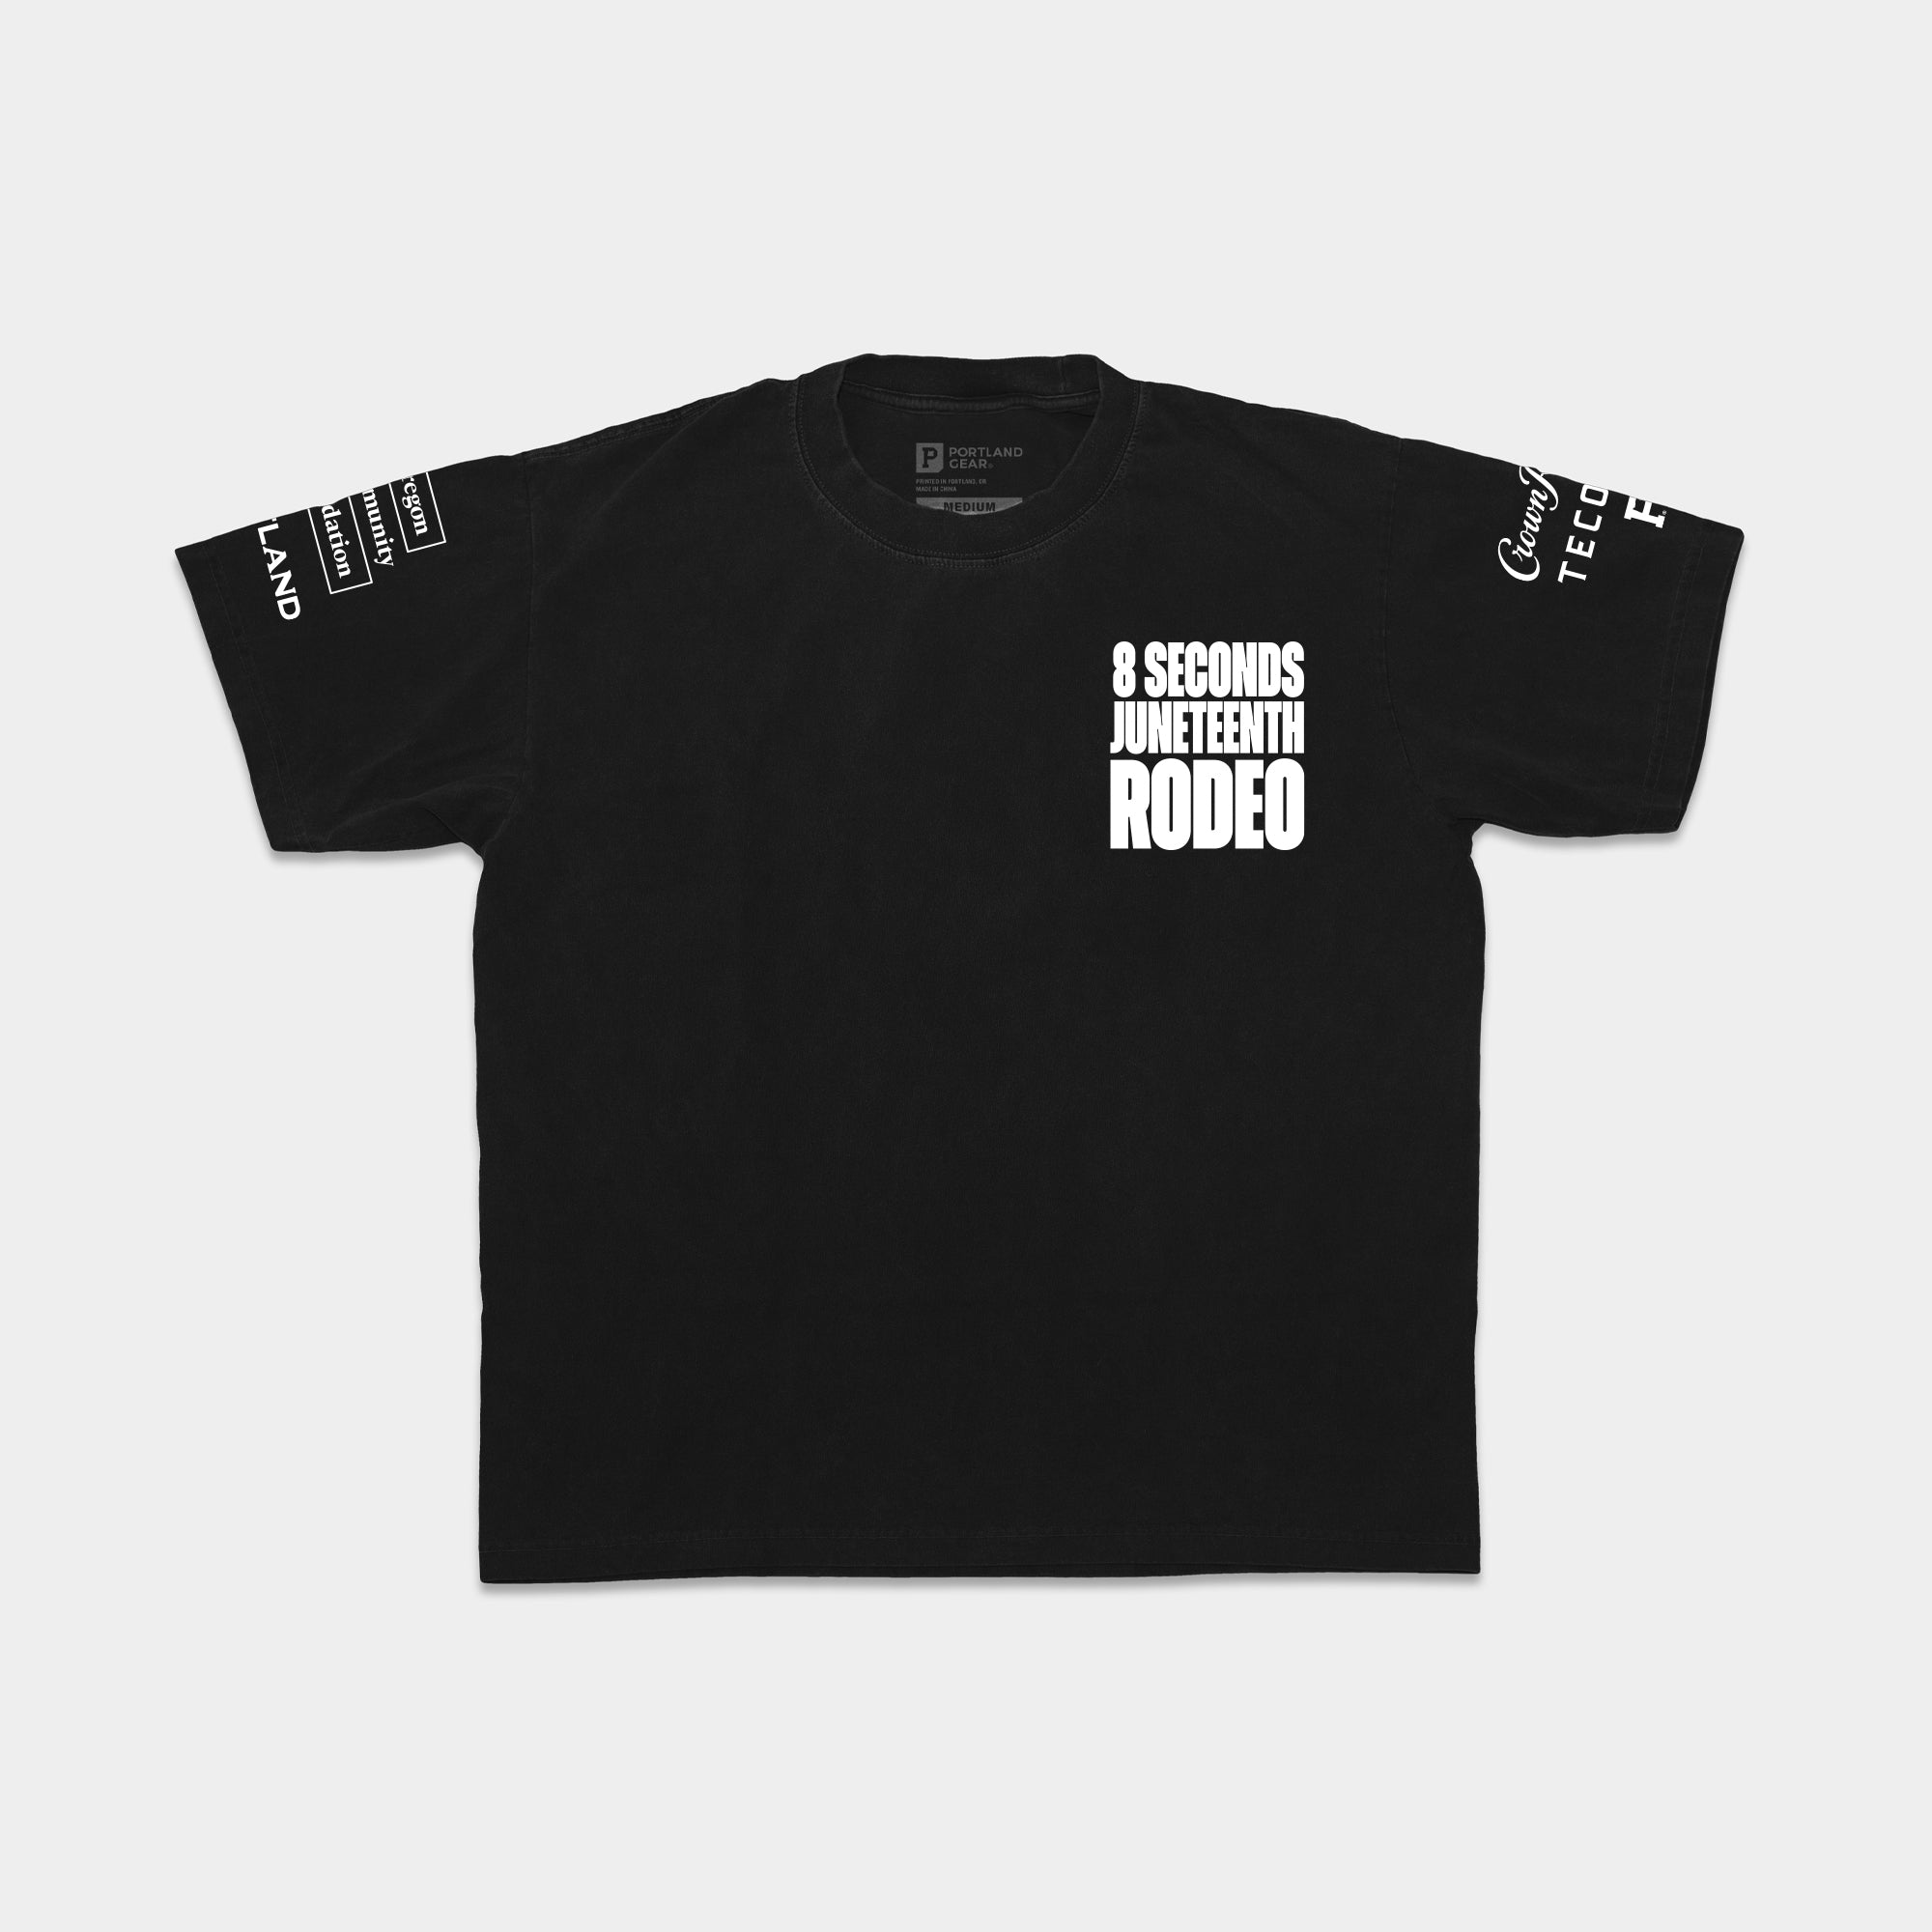 Eight Seconds Rodeo Tee